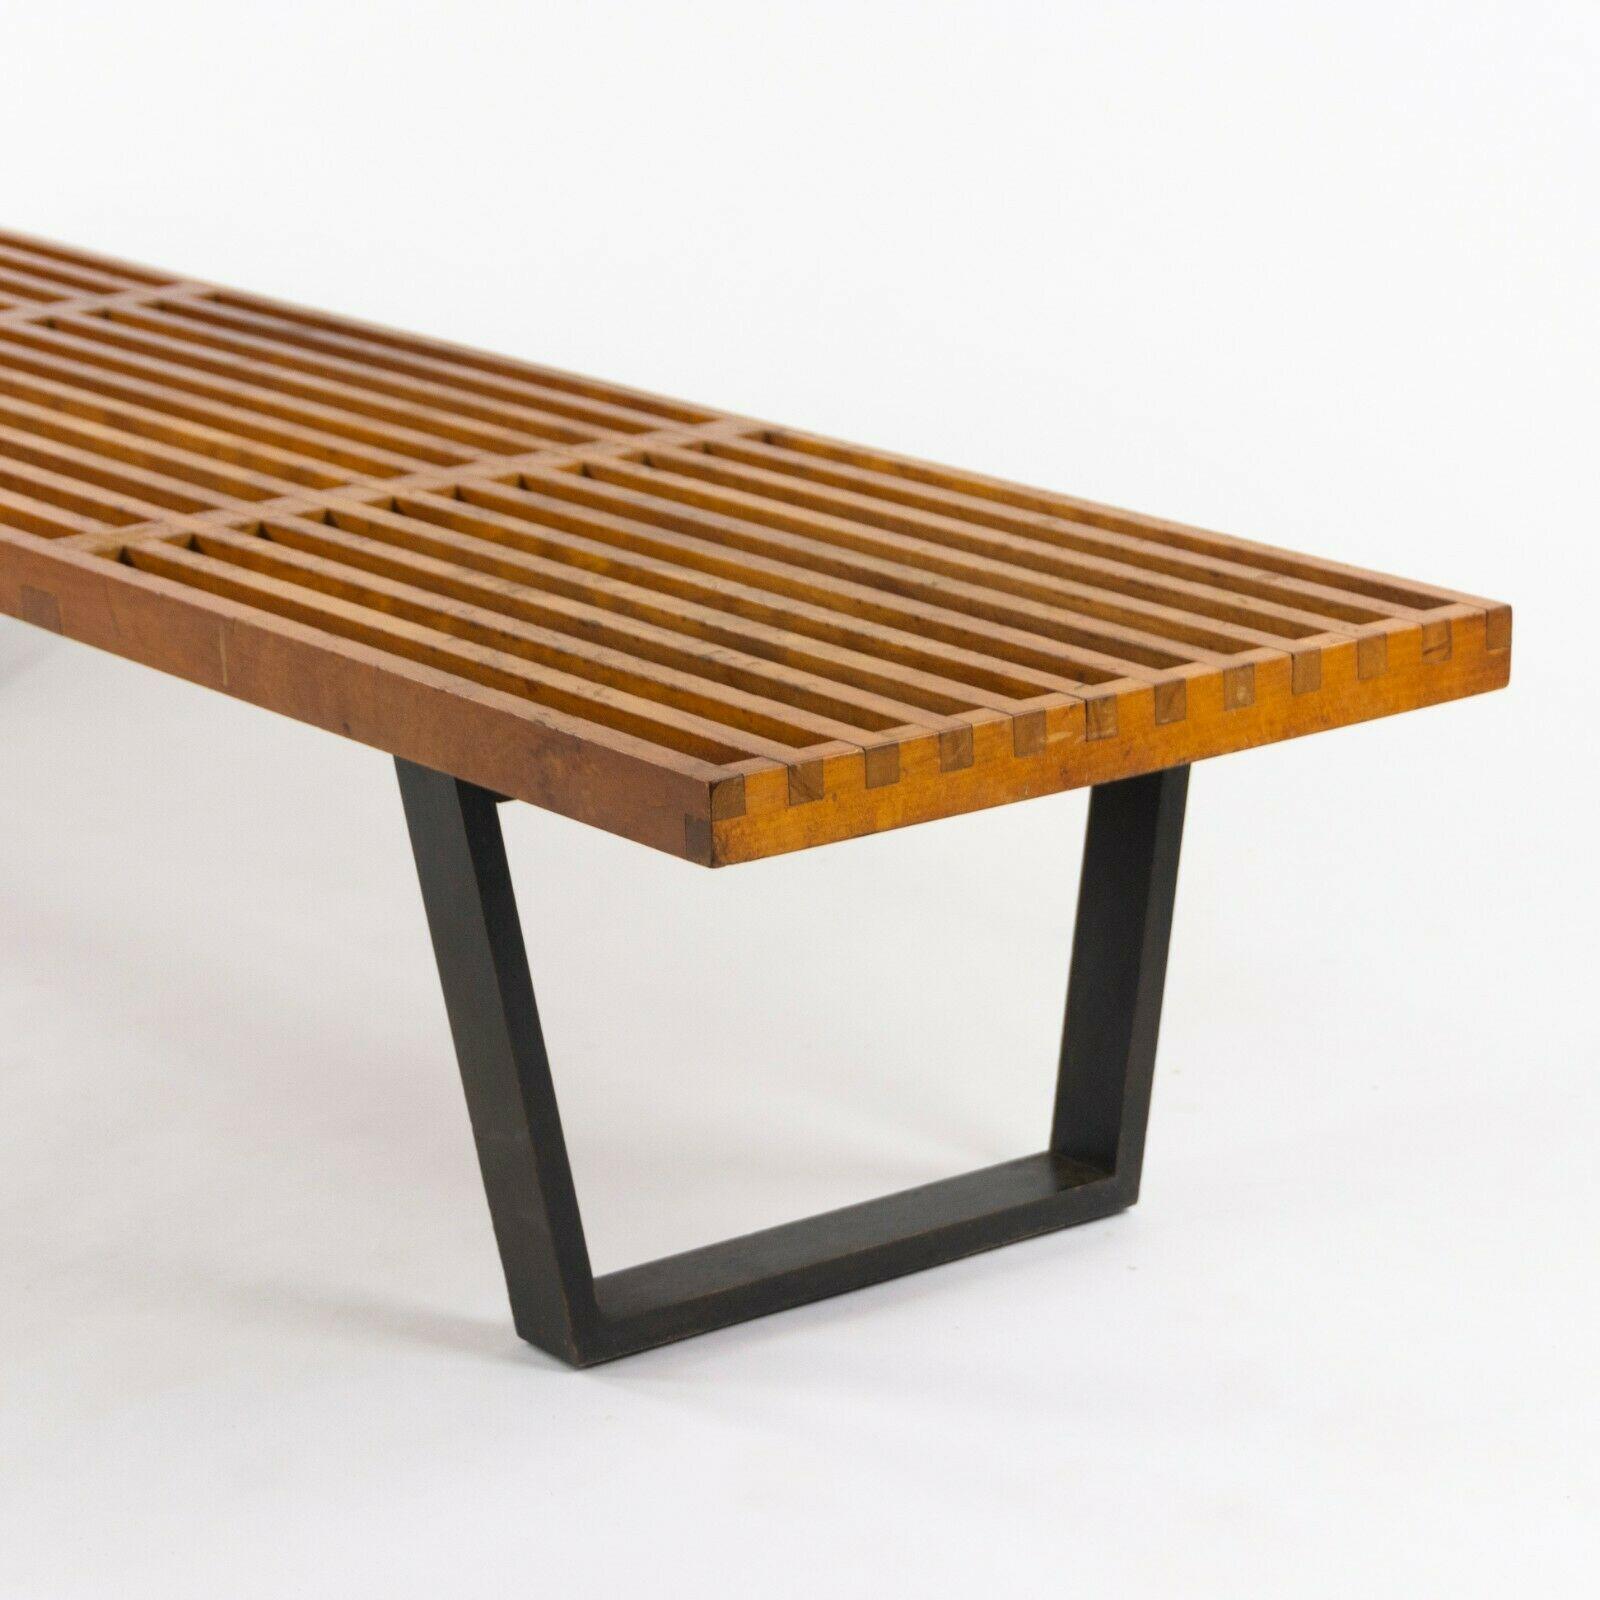 Mid-20th Century 1950s George Nelson Herman Miller 72.5 inch 4692 Slatted Platform Bench in Birch For Sale